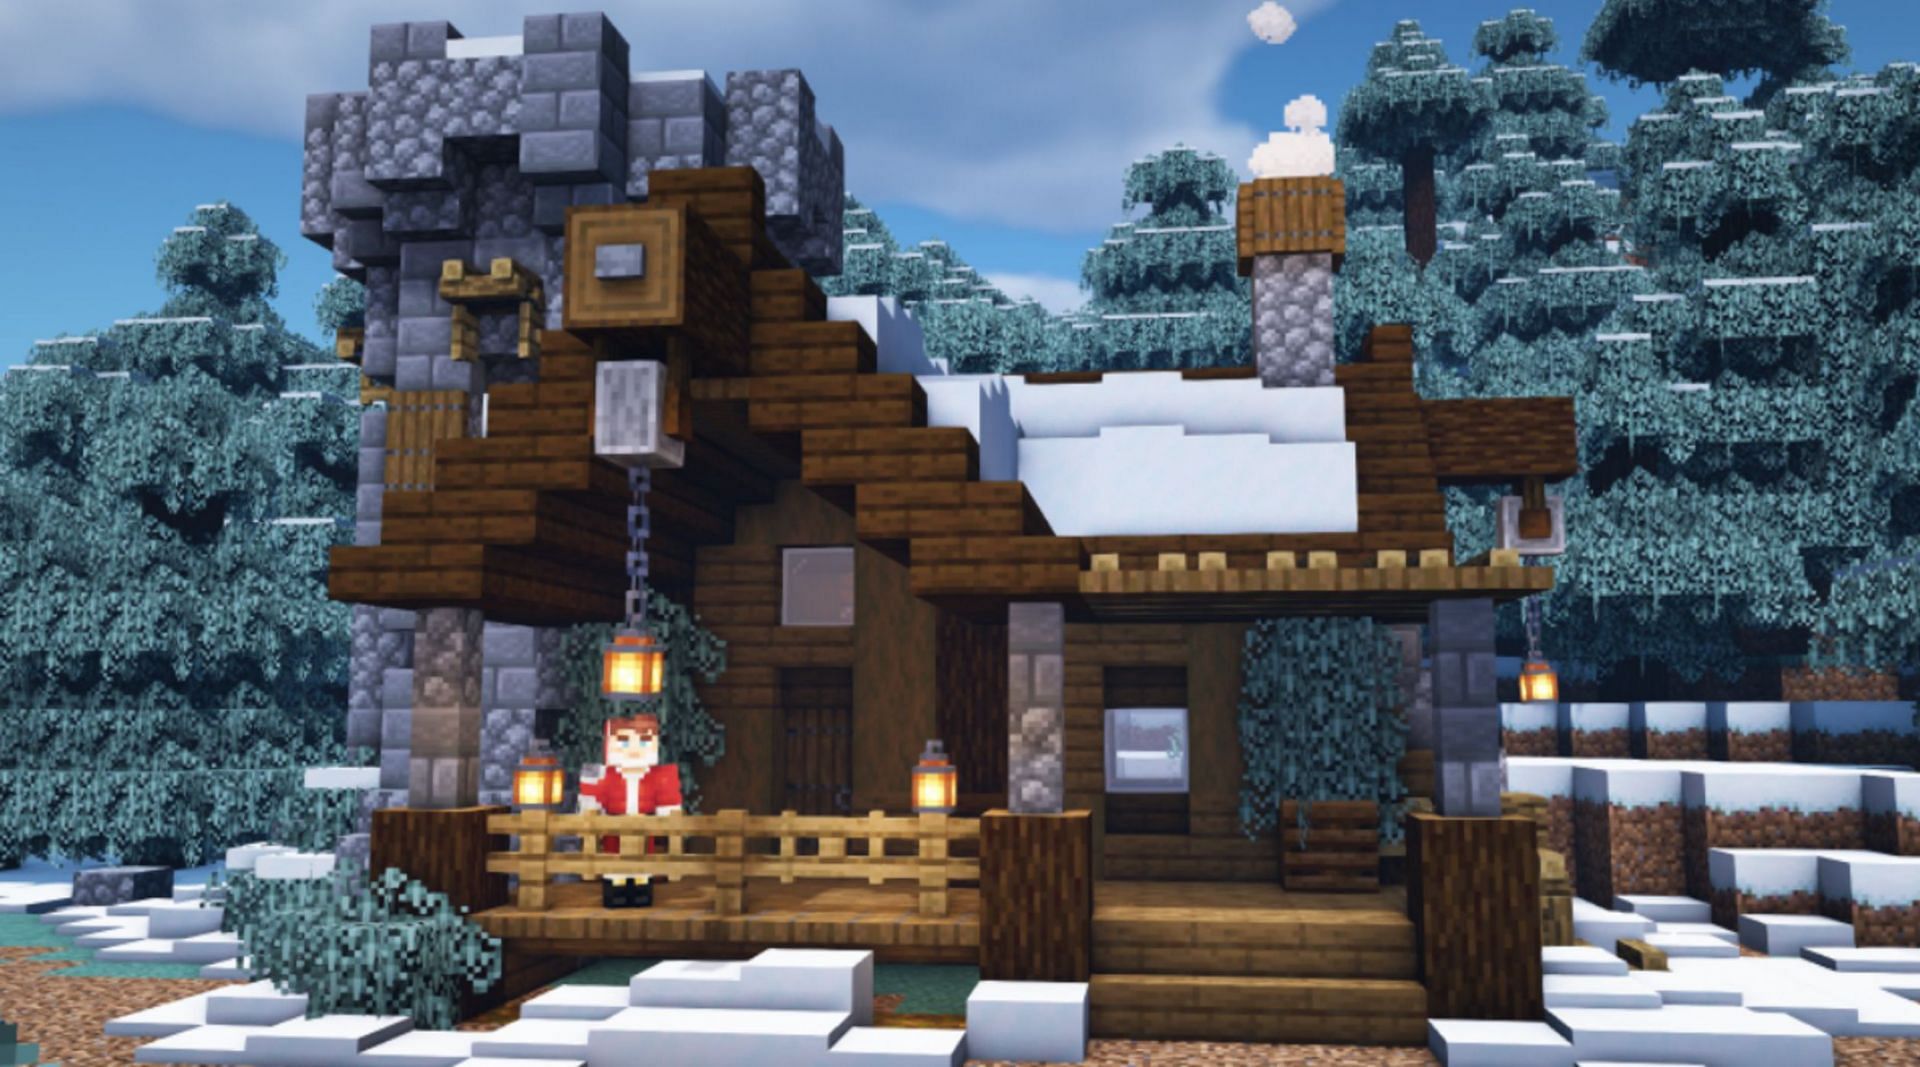 Mythical Sausage brings a build perfect for snowy biomes (Image via @MythicalSausage/Twitter)